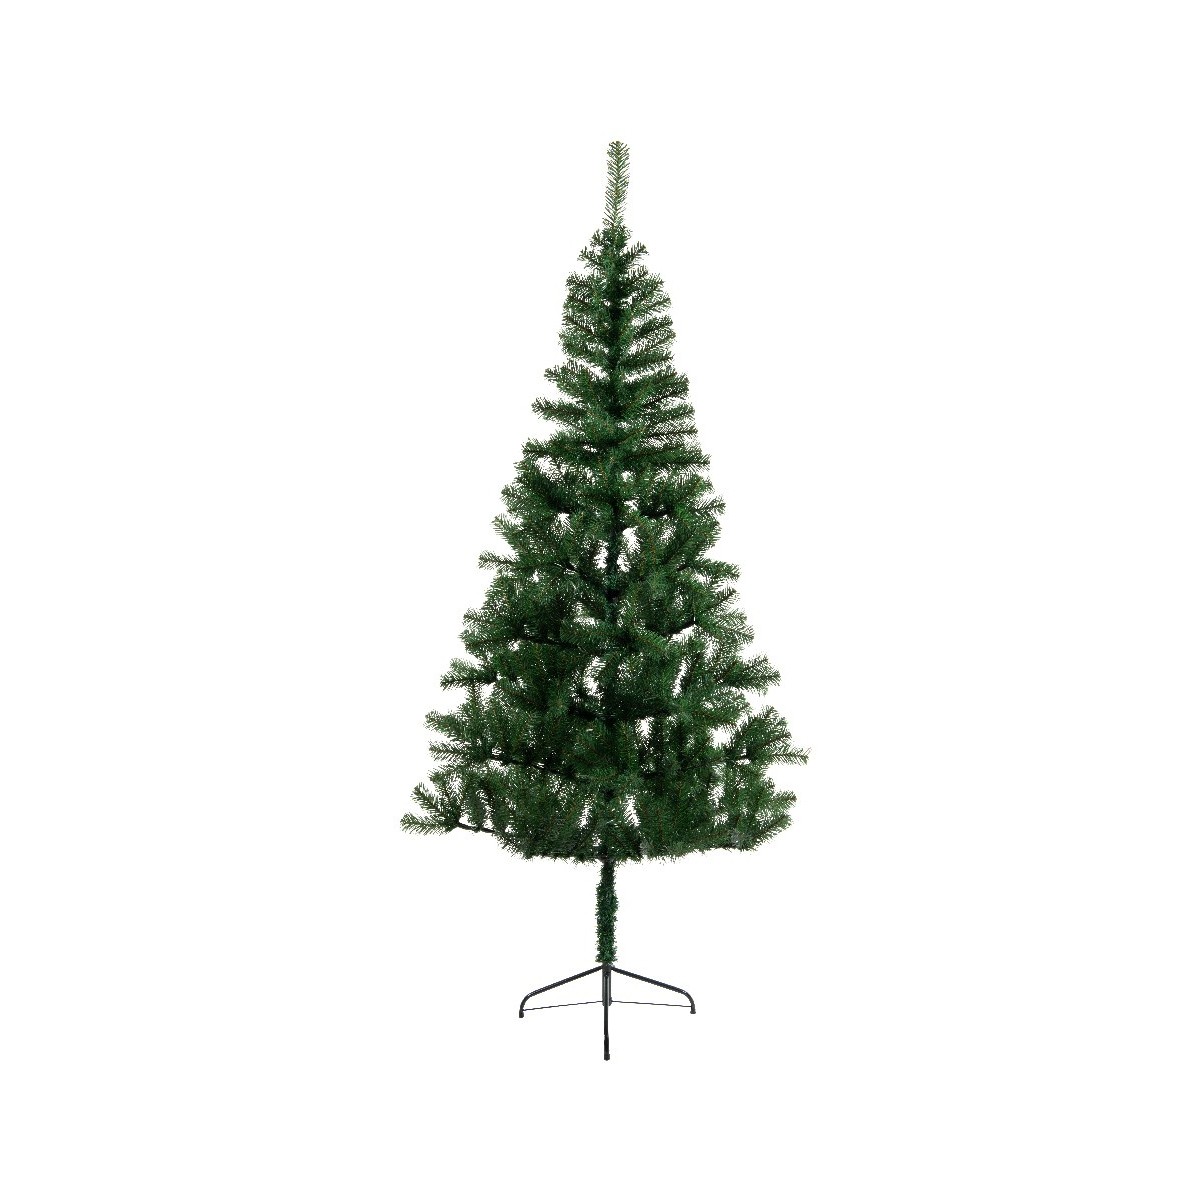 180cm/6ft Christmas Slim Green Artificial Pine Tree with Hinged Branches